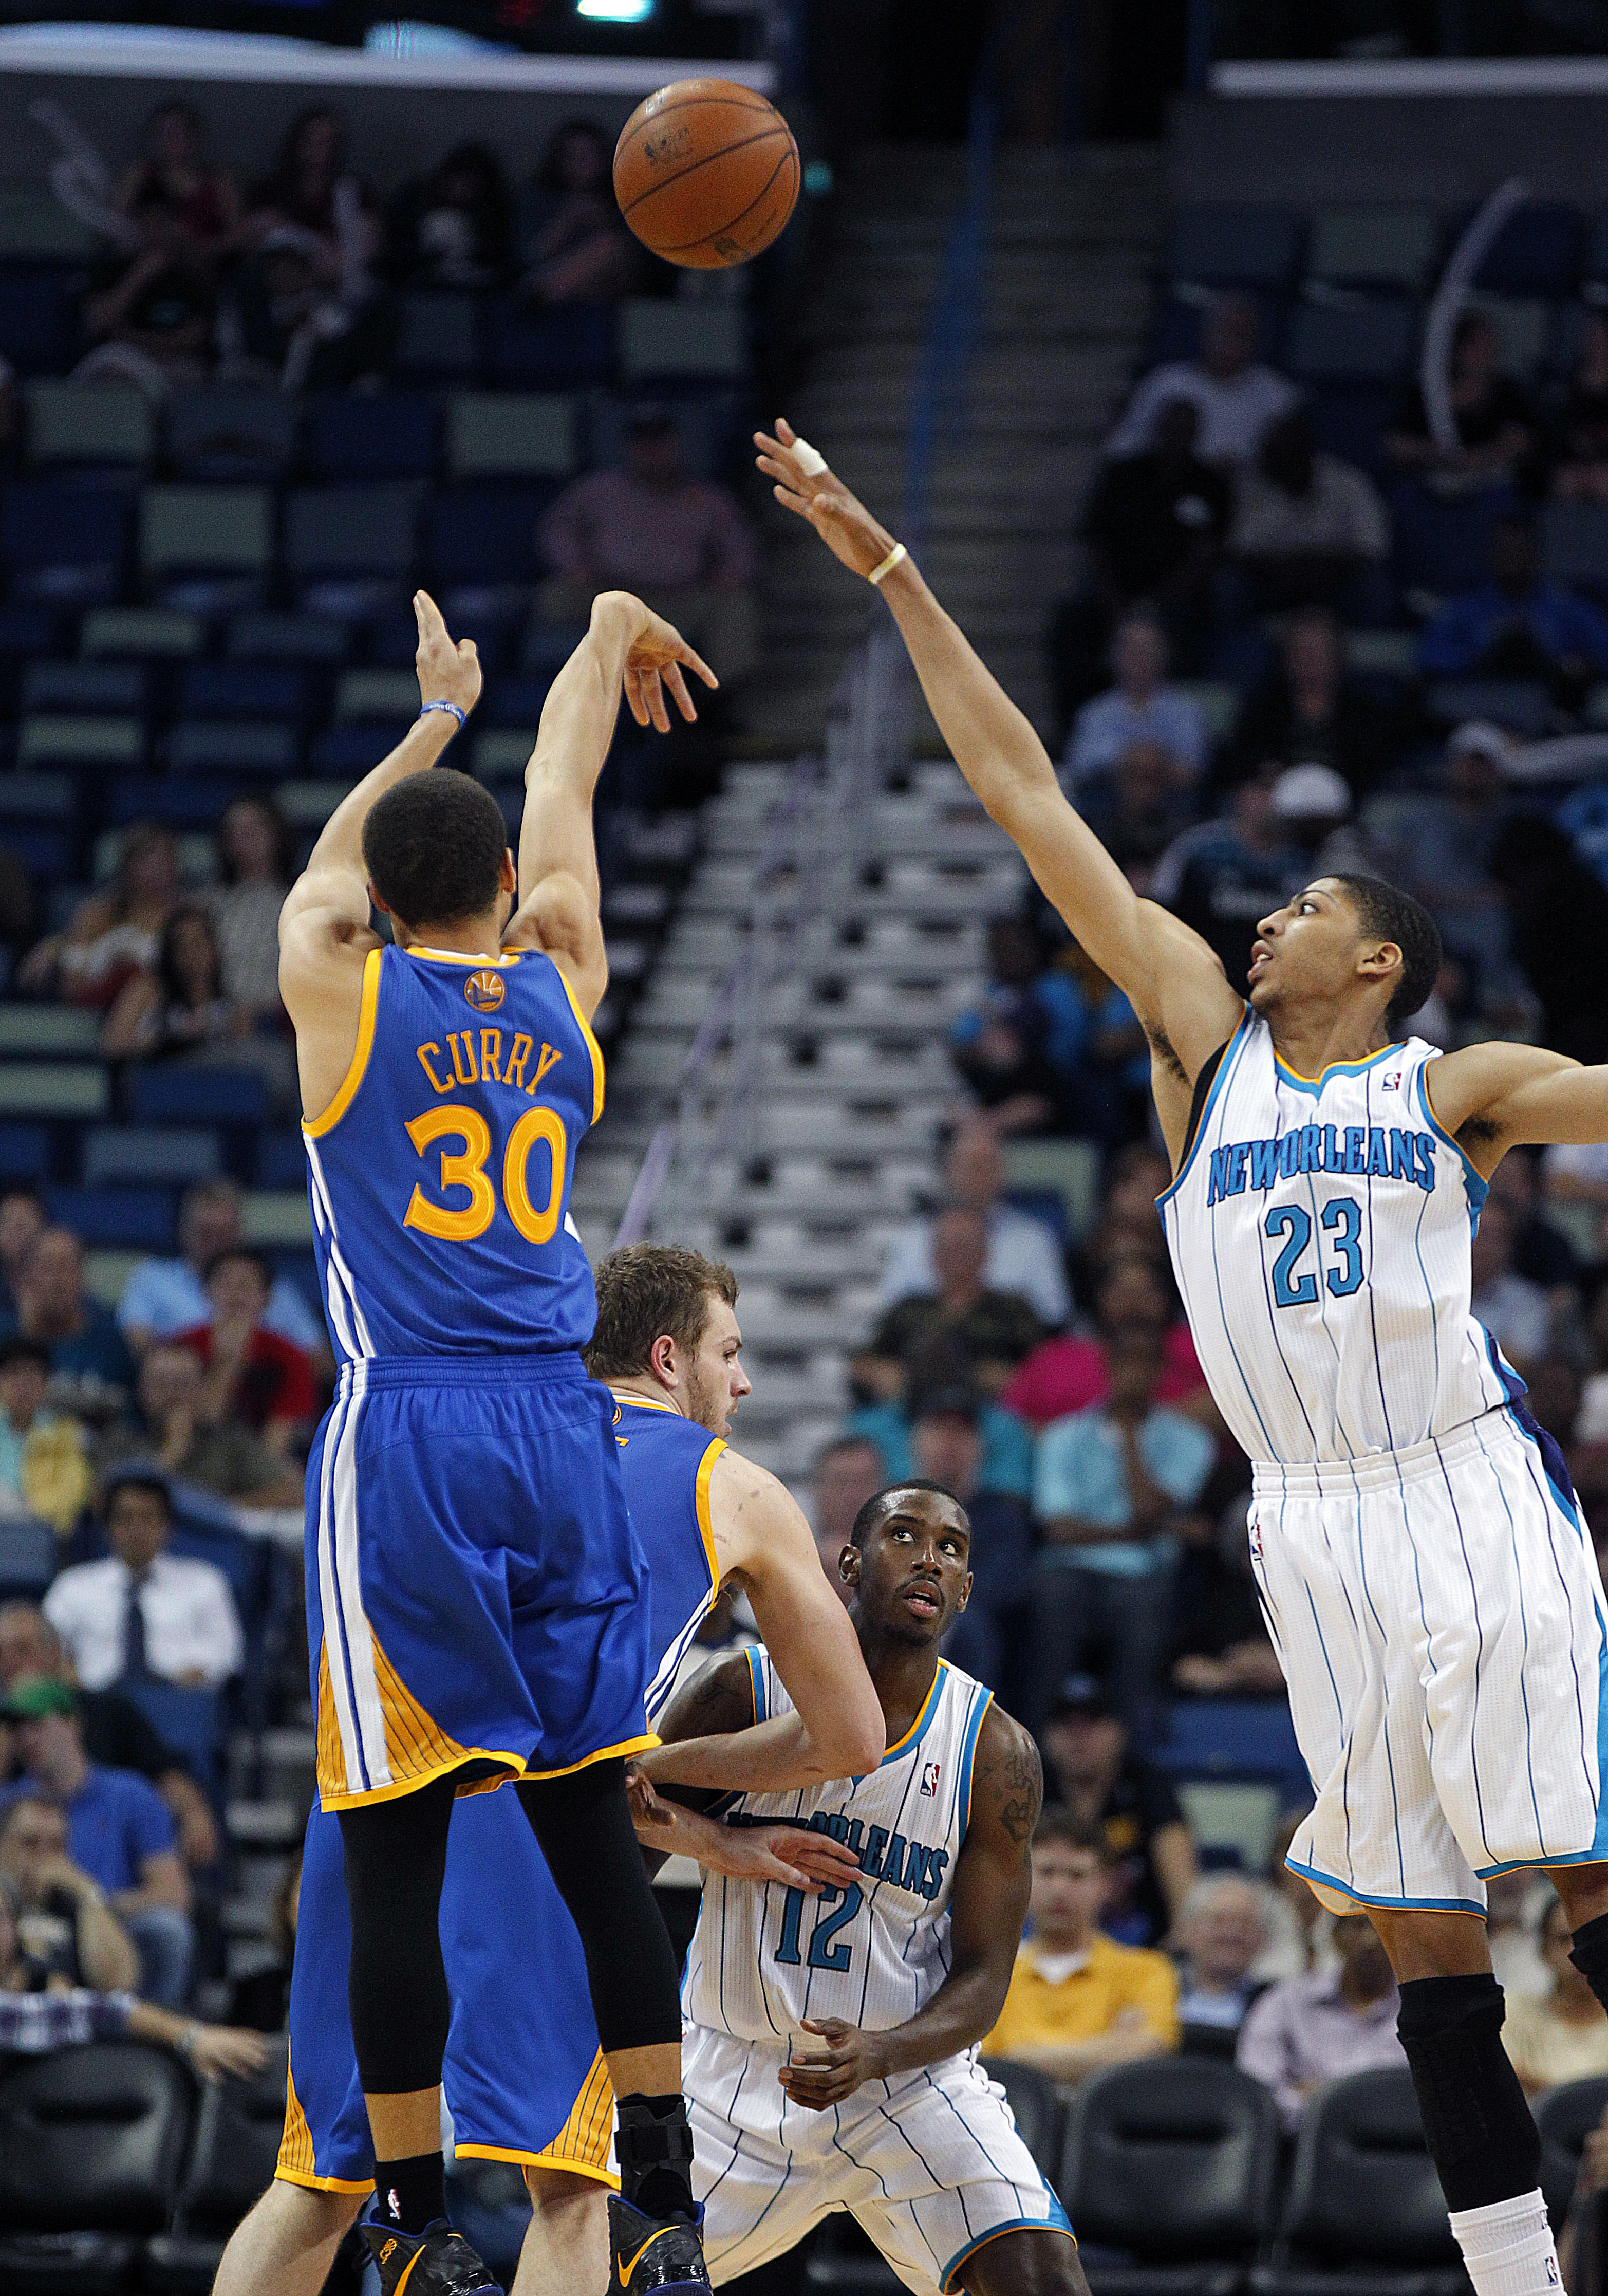 Stephen Curry, Anthony Davis - Steph Curry Shooting From Behind - HD Wallpaper 